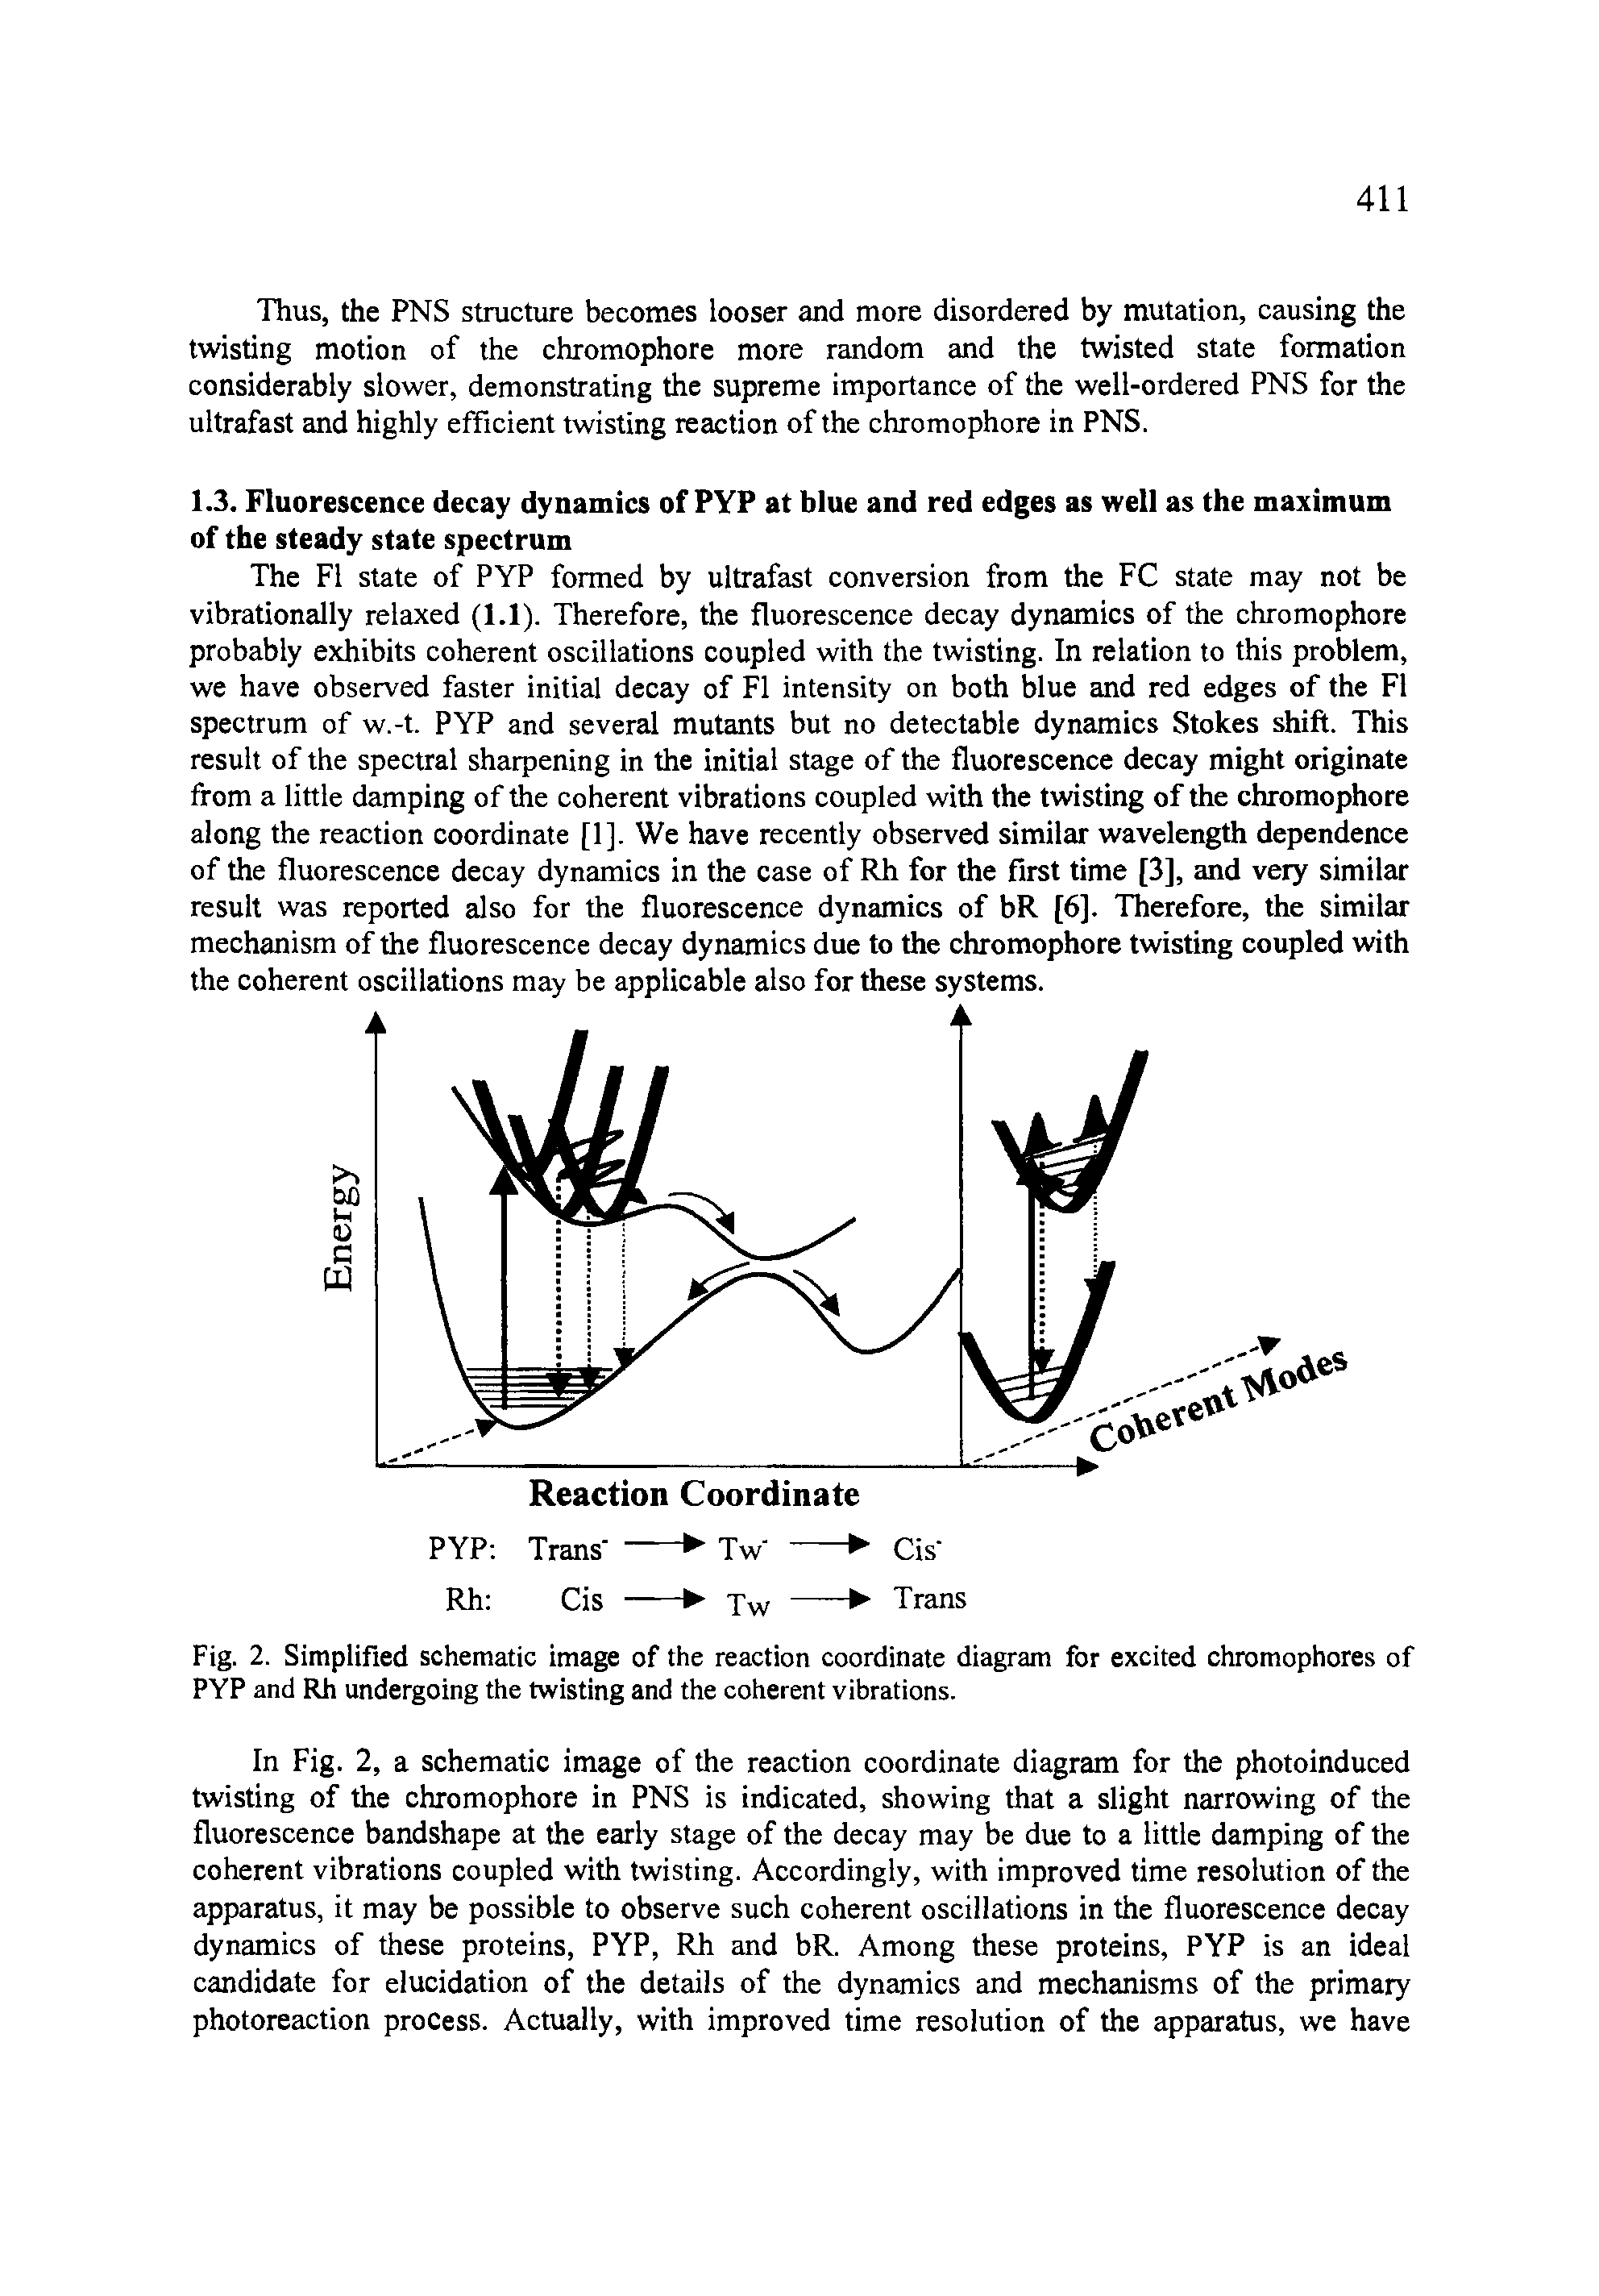 Fig. 2. Simplified schematic image of the reaction coordinate diagram for excited chromophores of PYP and Rh undergoing the twisting and the coherent vibrations.